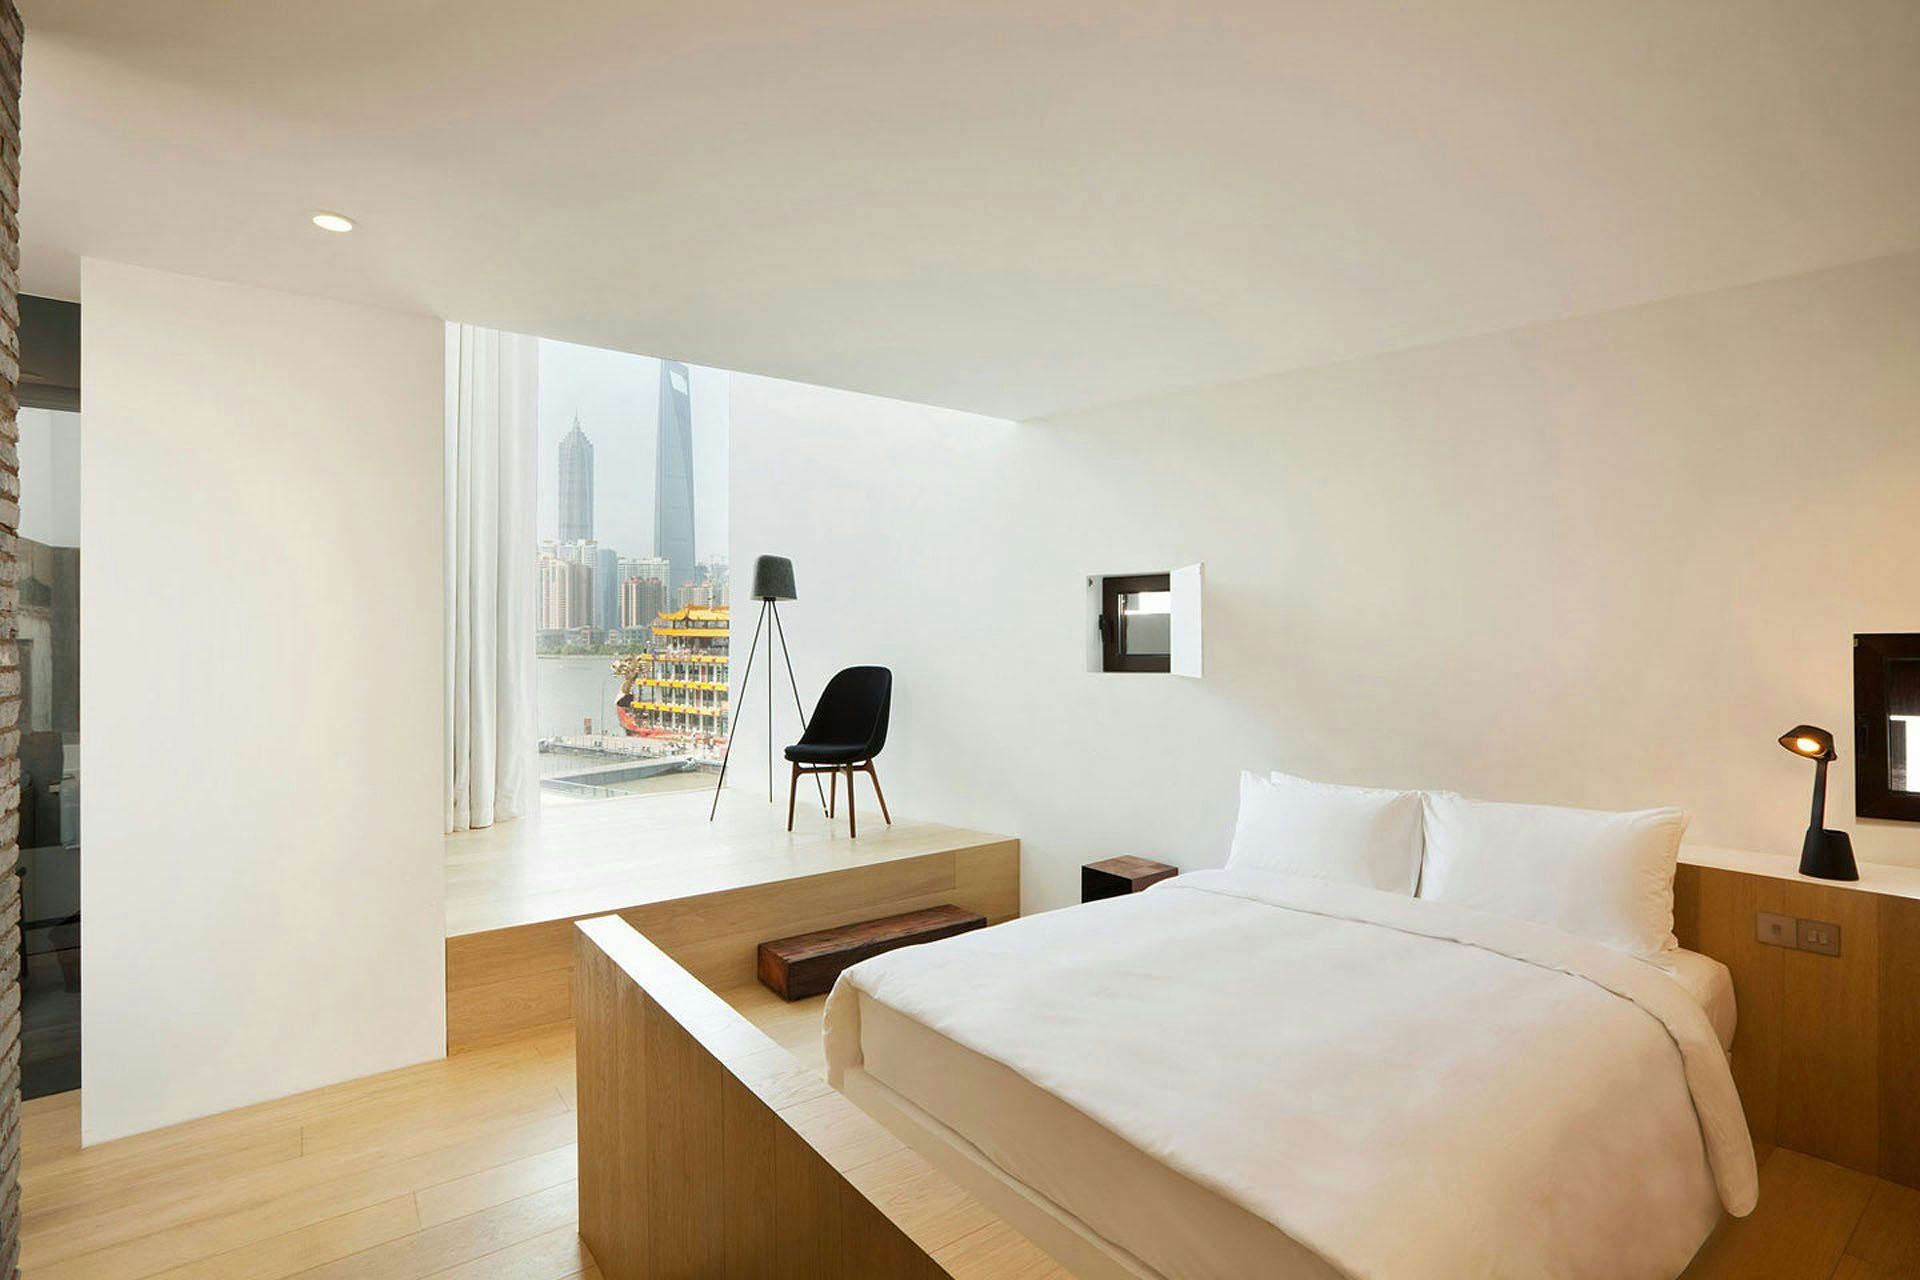 Unlisted Collection's Shanghai hotel is designed with the global citizen in mind rather than specifically catering to Chinese tastes. (Courtesy Photo)